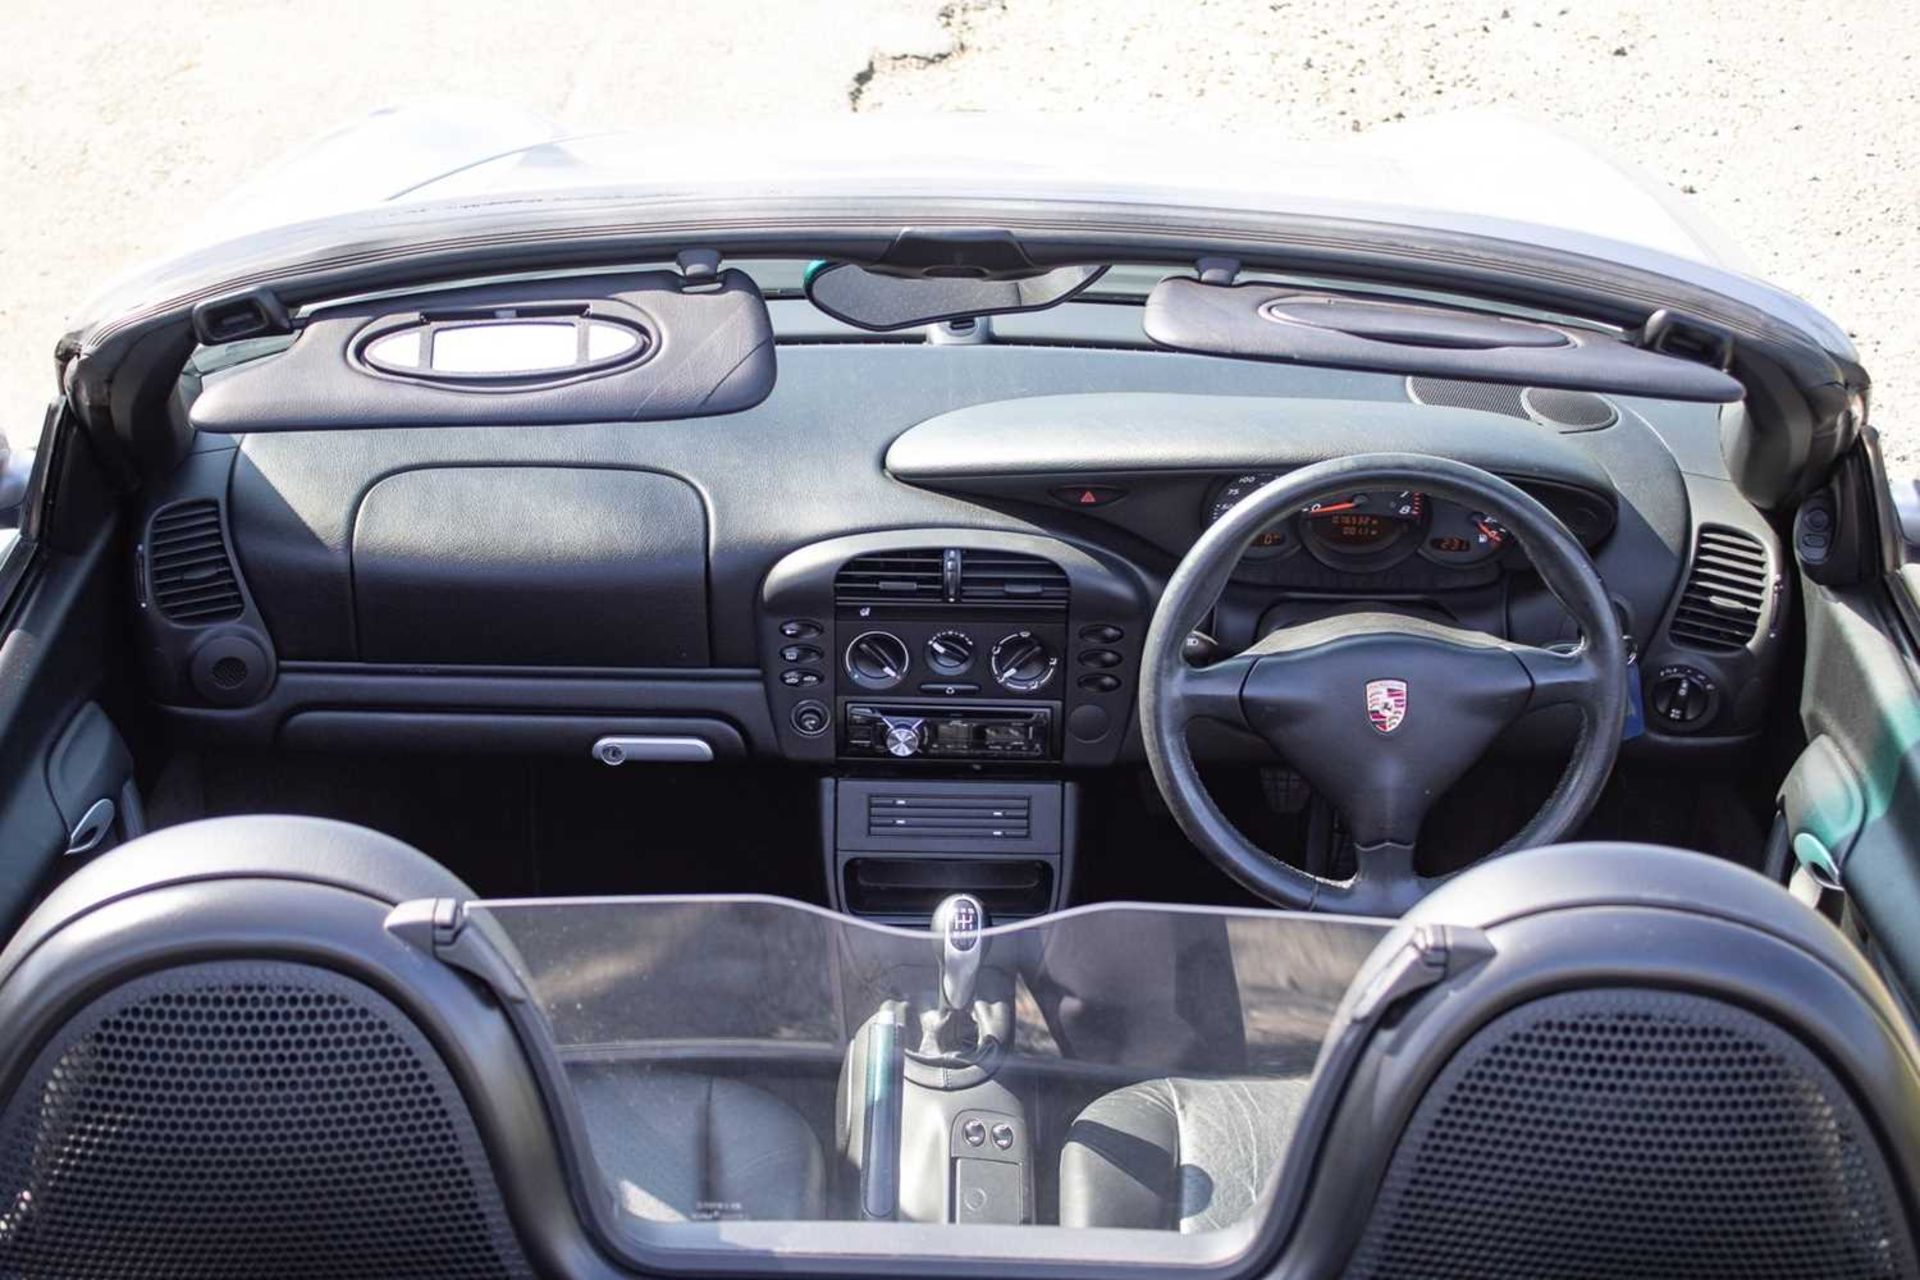 2003 Porsche Boxster 2.7  Desirable manual gearbox  - Image 51 of 85